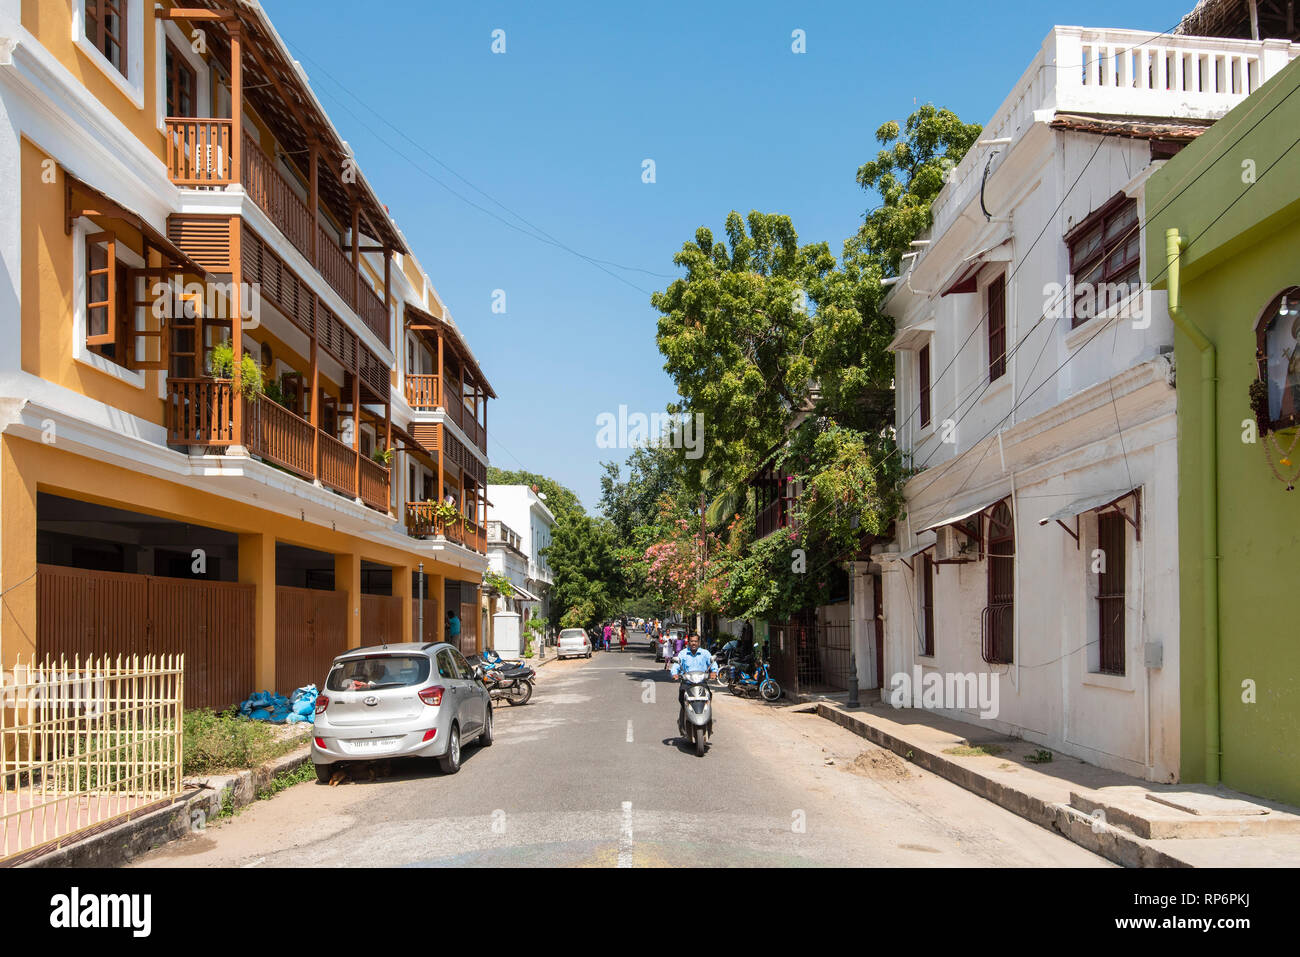 Allocated to the French Consulate General in 1956, the building is typical of the style and architecture in this part of Pondicherry. Stock Photo